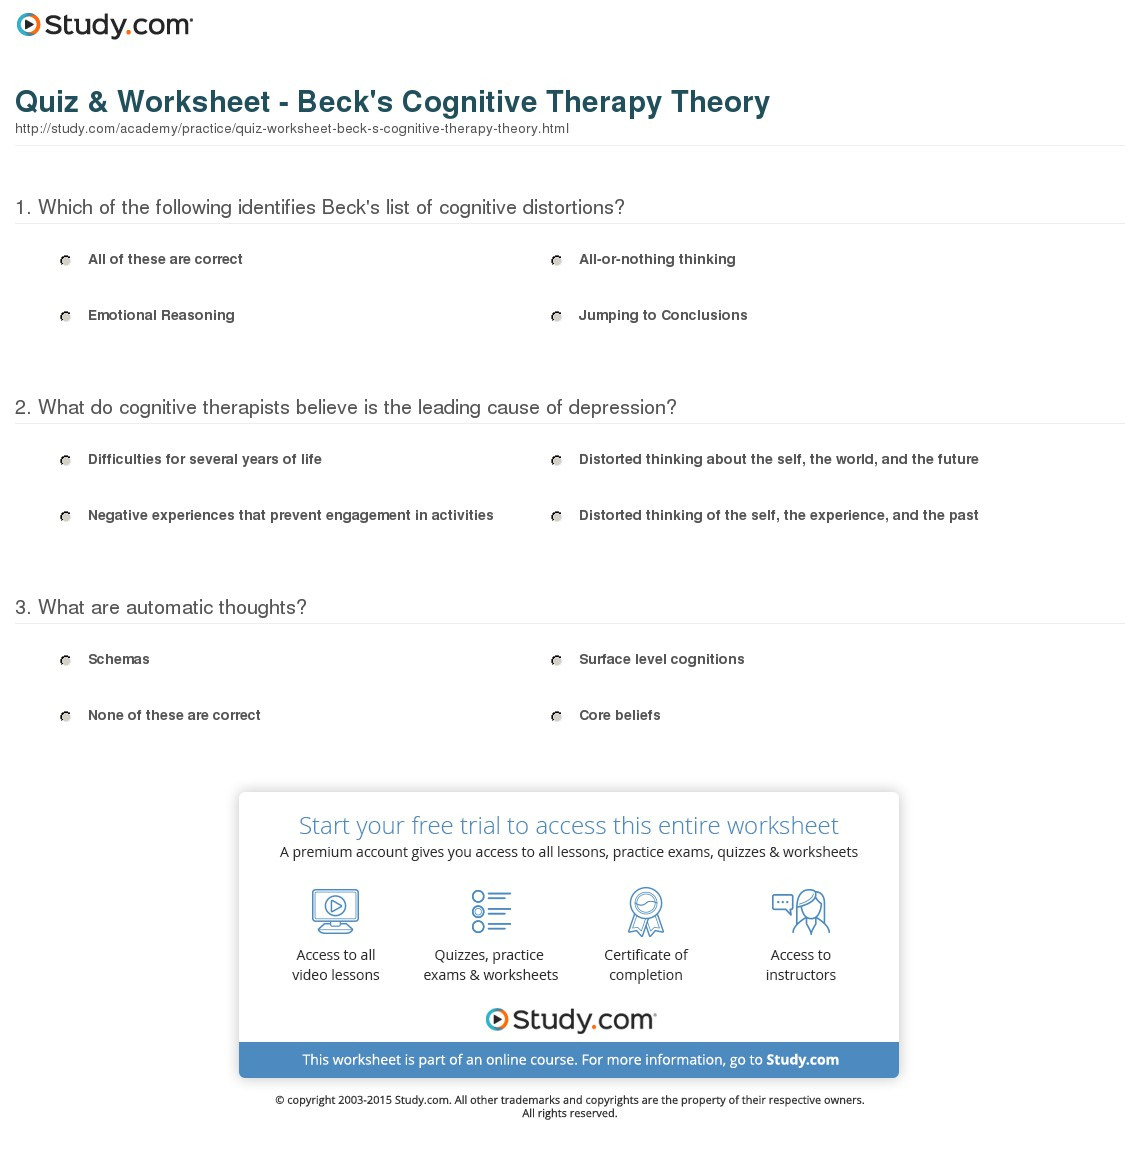 Quiz  Worksheet  Beck's Cognitive Therapy Theory  Study